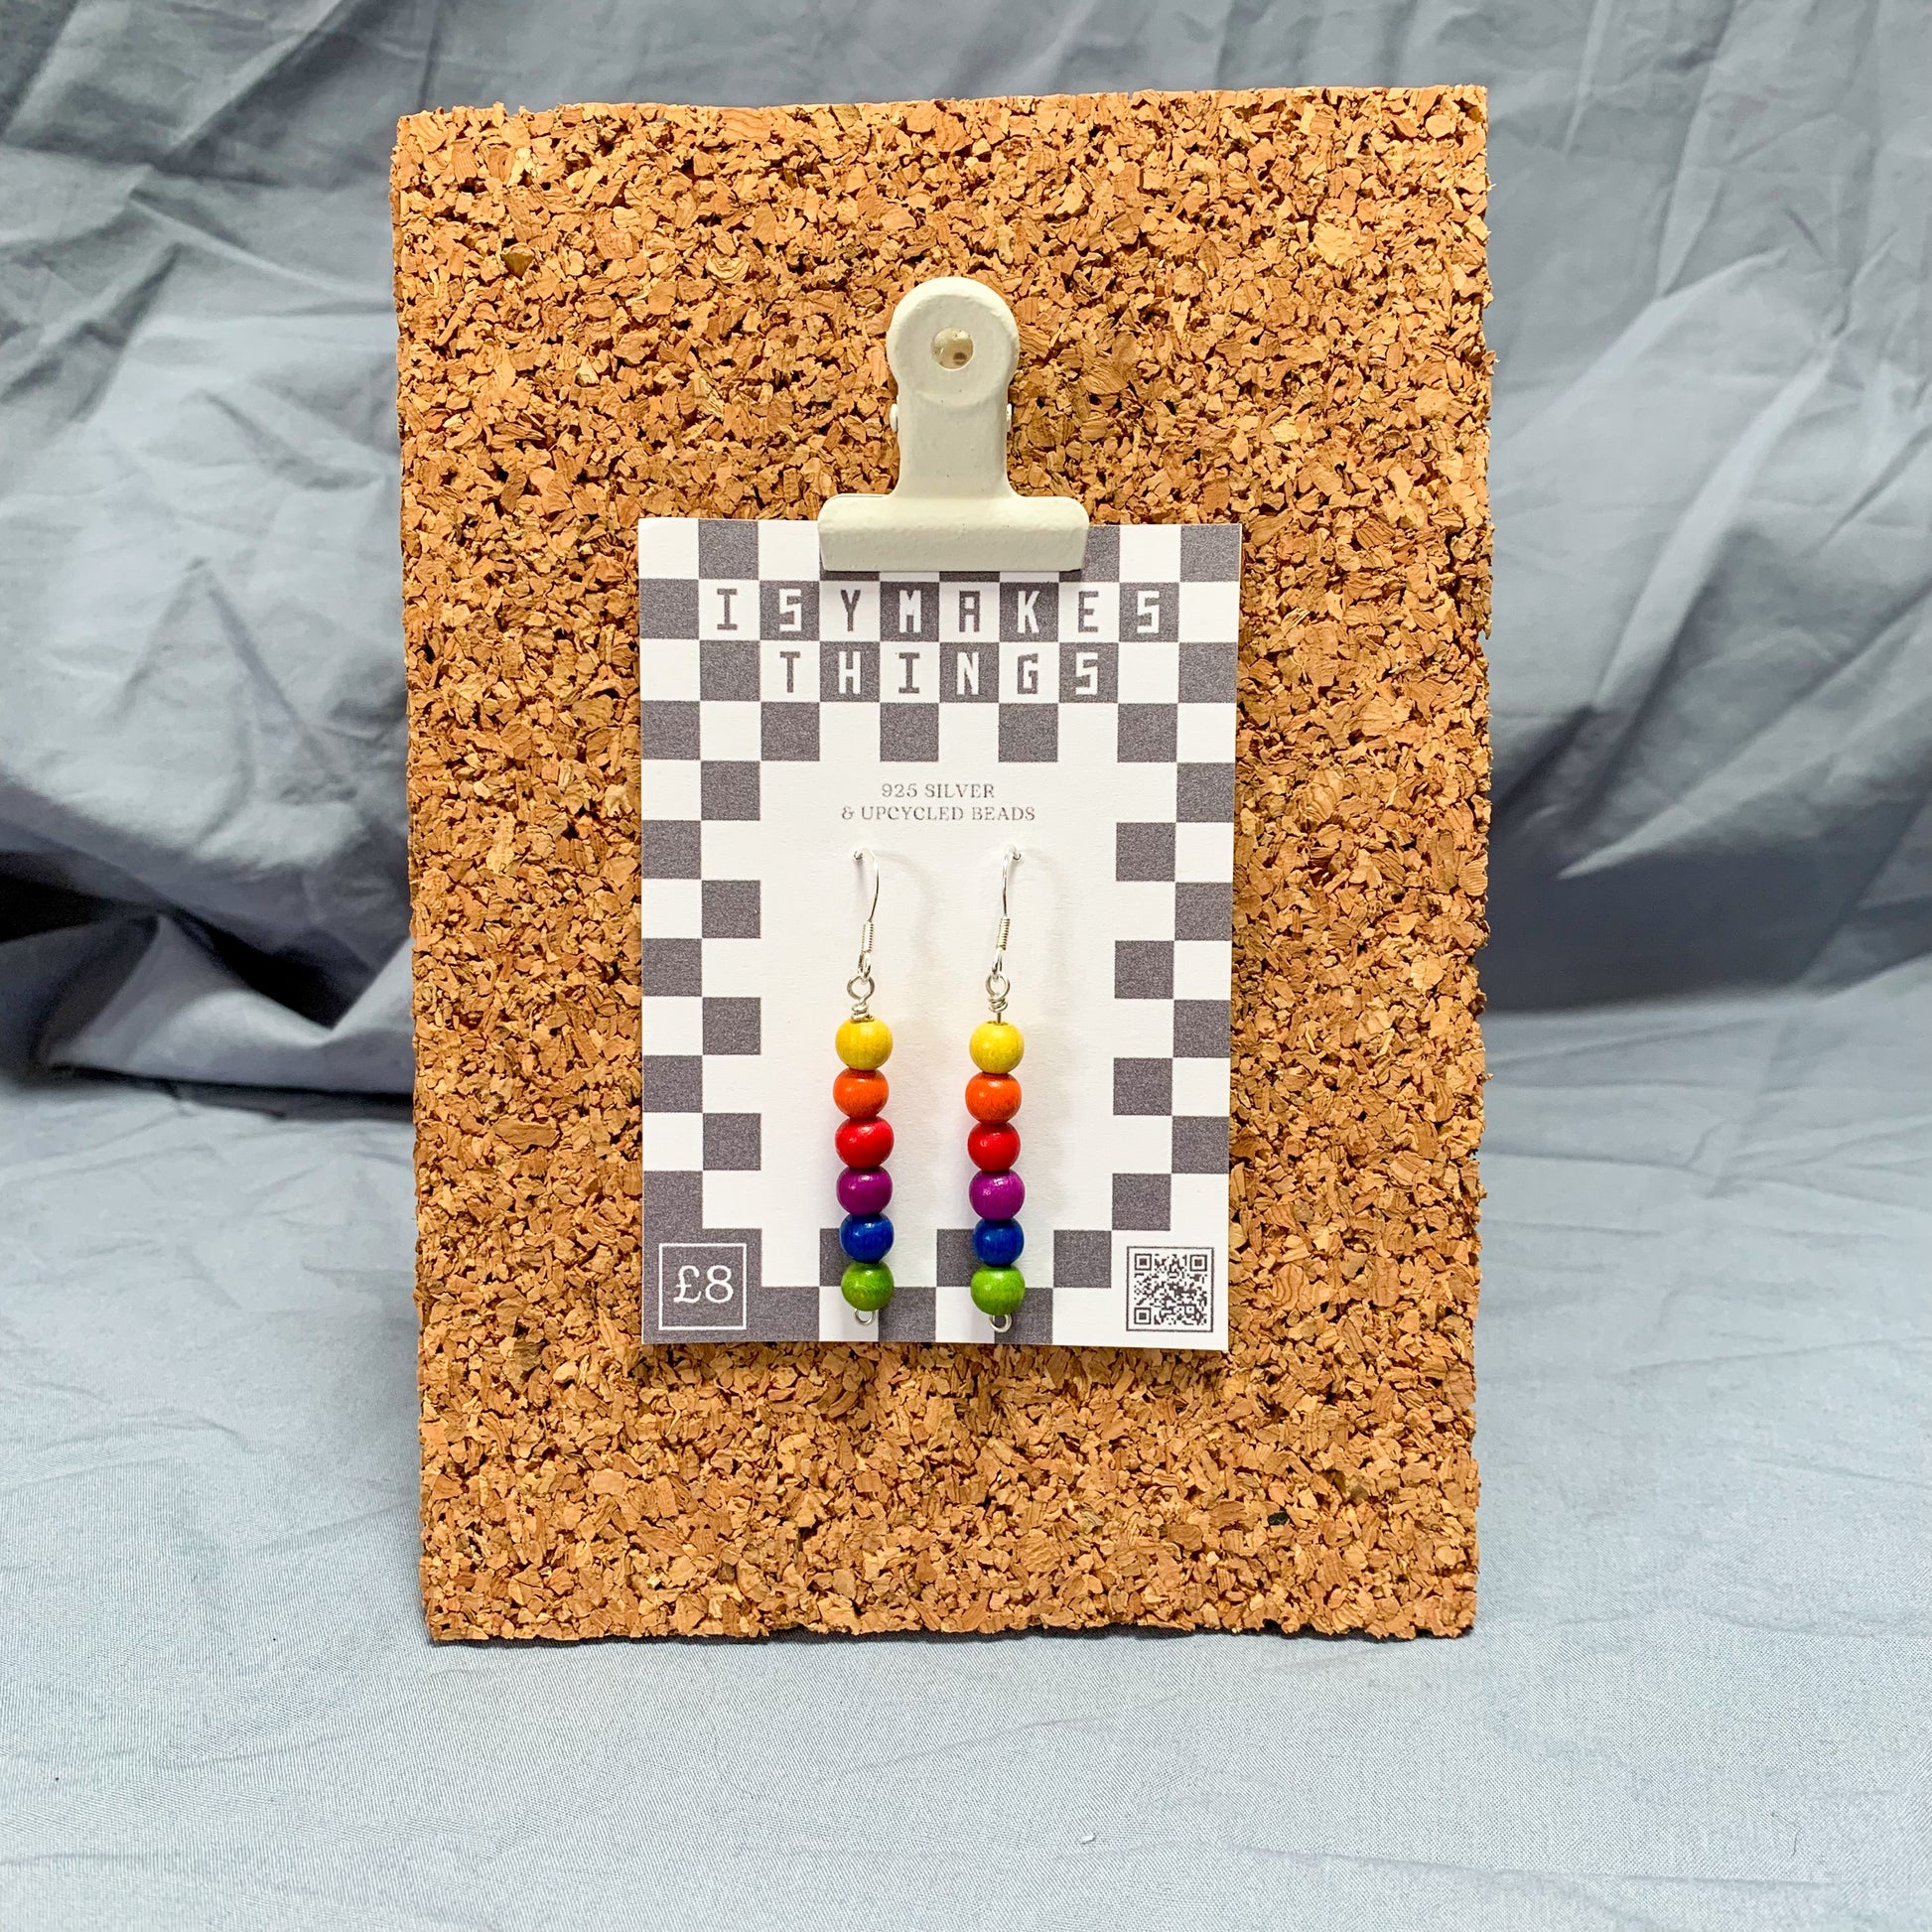 Rainbow bead earrings on a checkerboard backing pegged to a corkboard against a blue background